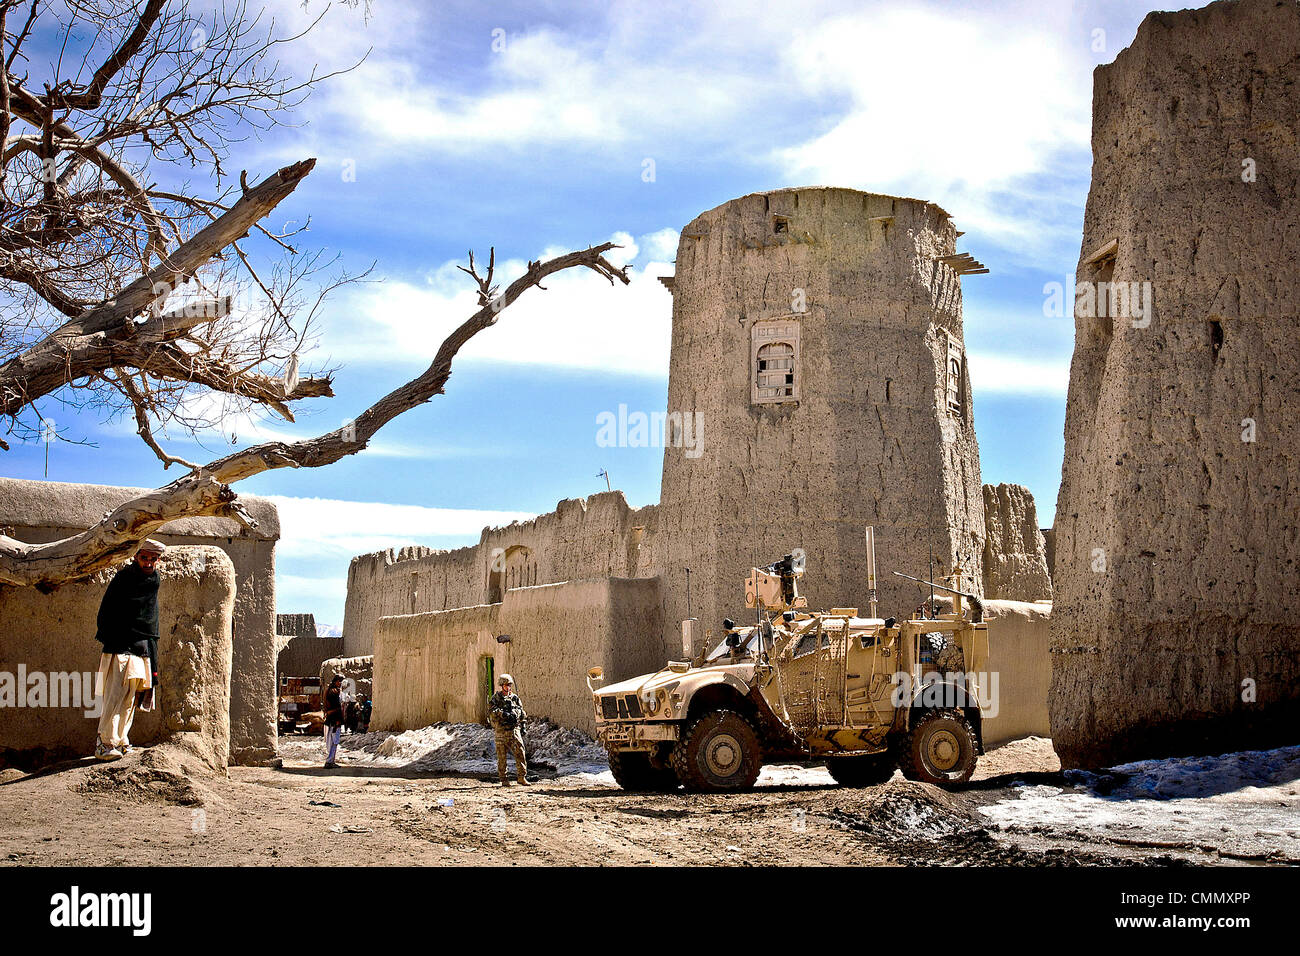 US Army soldiers cordon off the town square of a small village near Combat Outpost Yosef Khel March 9, 2012 in Patika, Afghanistan. The soldiers were assisting the Afghan Uniformed Police and Afghan National Army conduct traffic check points near the village. Stock Photo